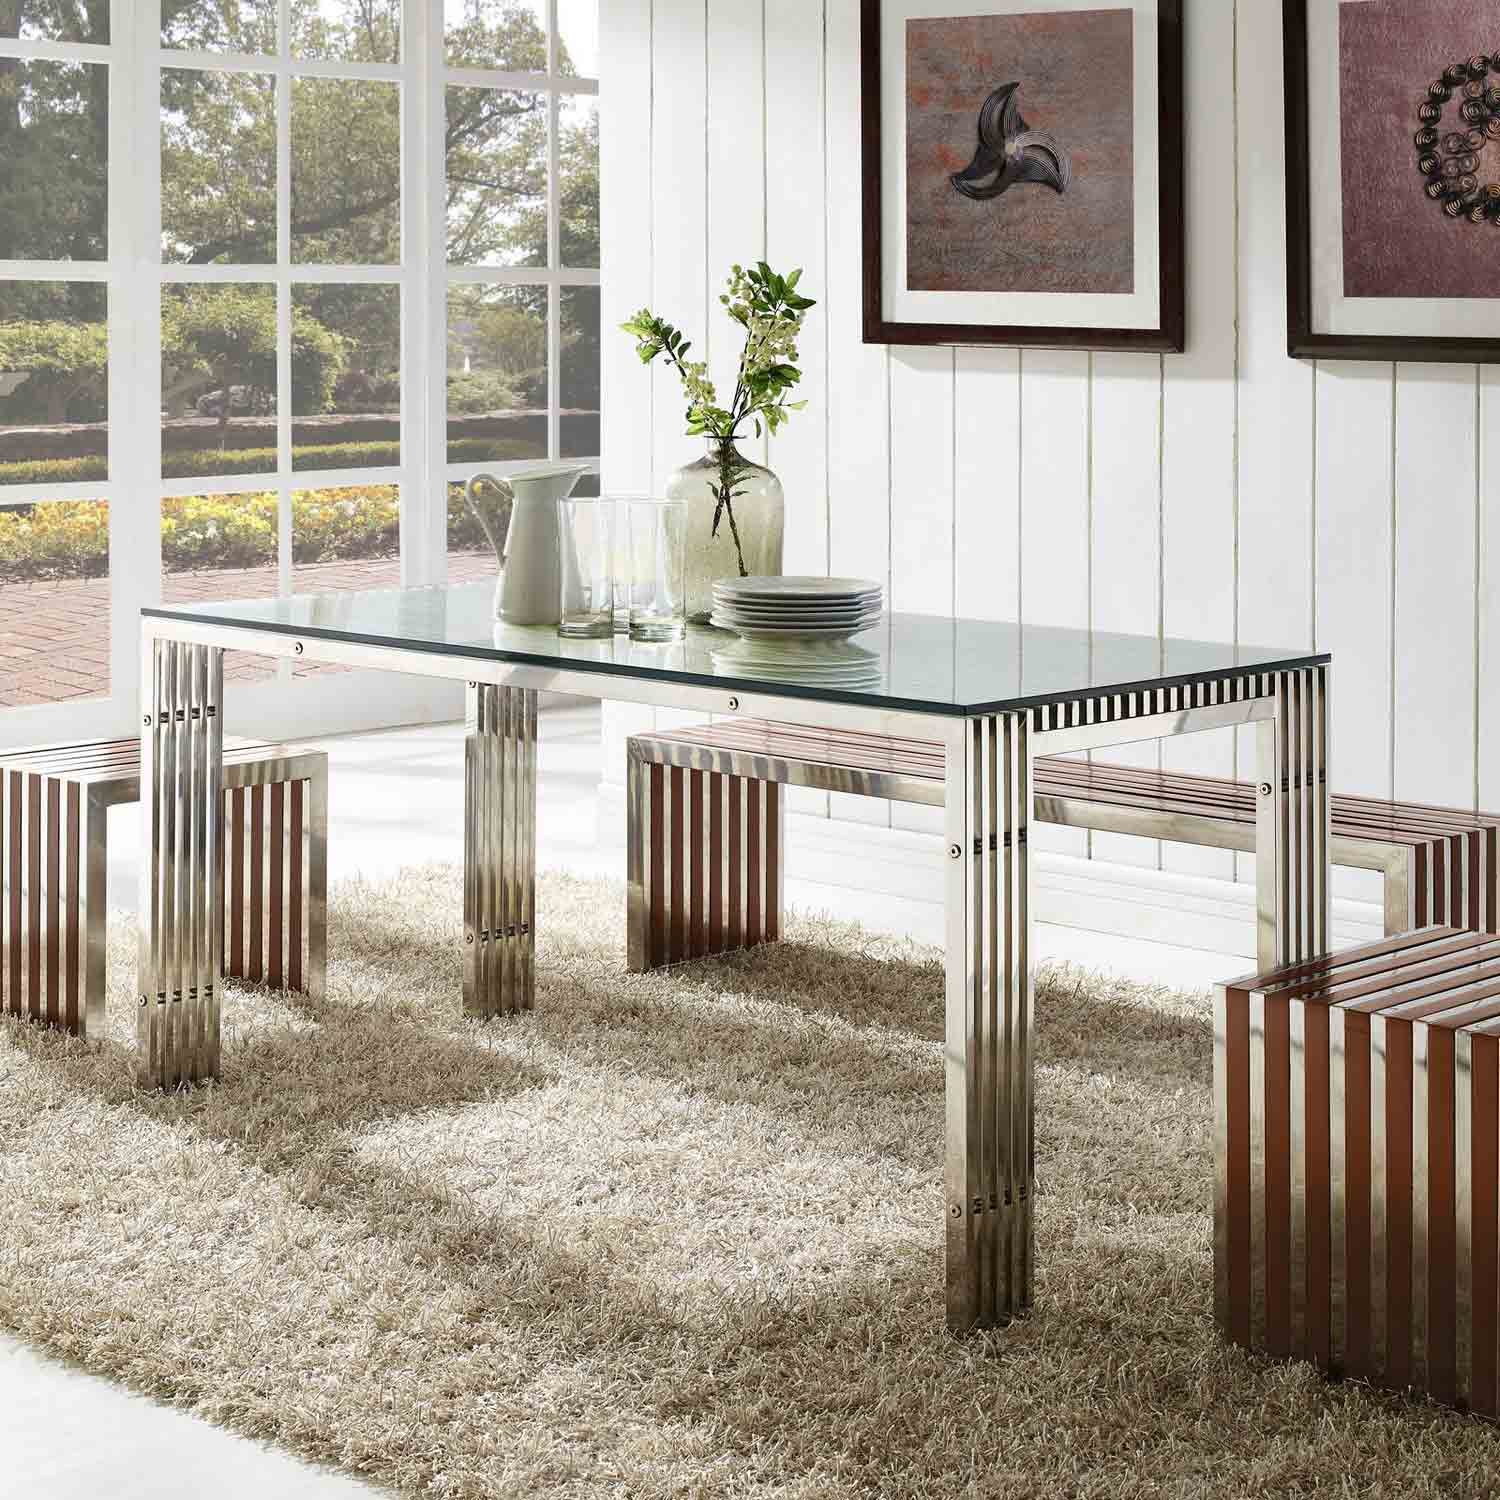 Modway Gridiron Stainless Steel Dining Table - Silver